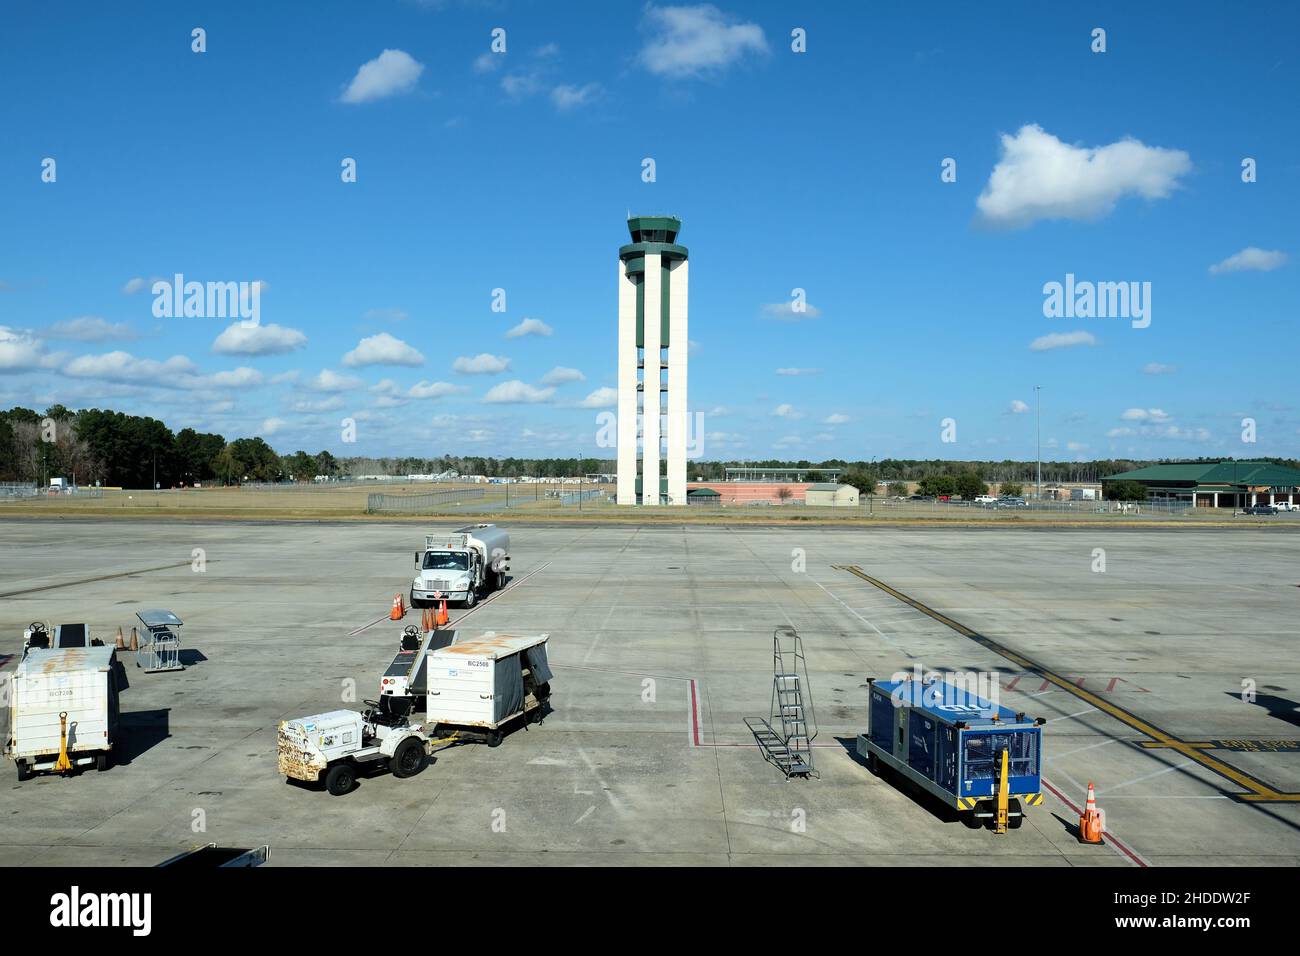 Air traffic control tower with service vehicles on jetway and tarmac at Savannah-Hilton Head Airport in Savannah, Georgia, USA. Stock Photo